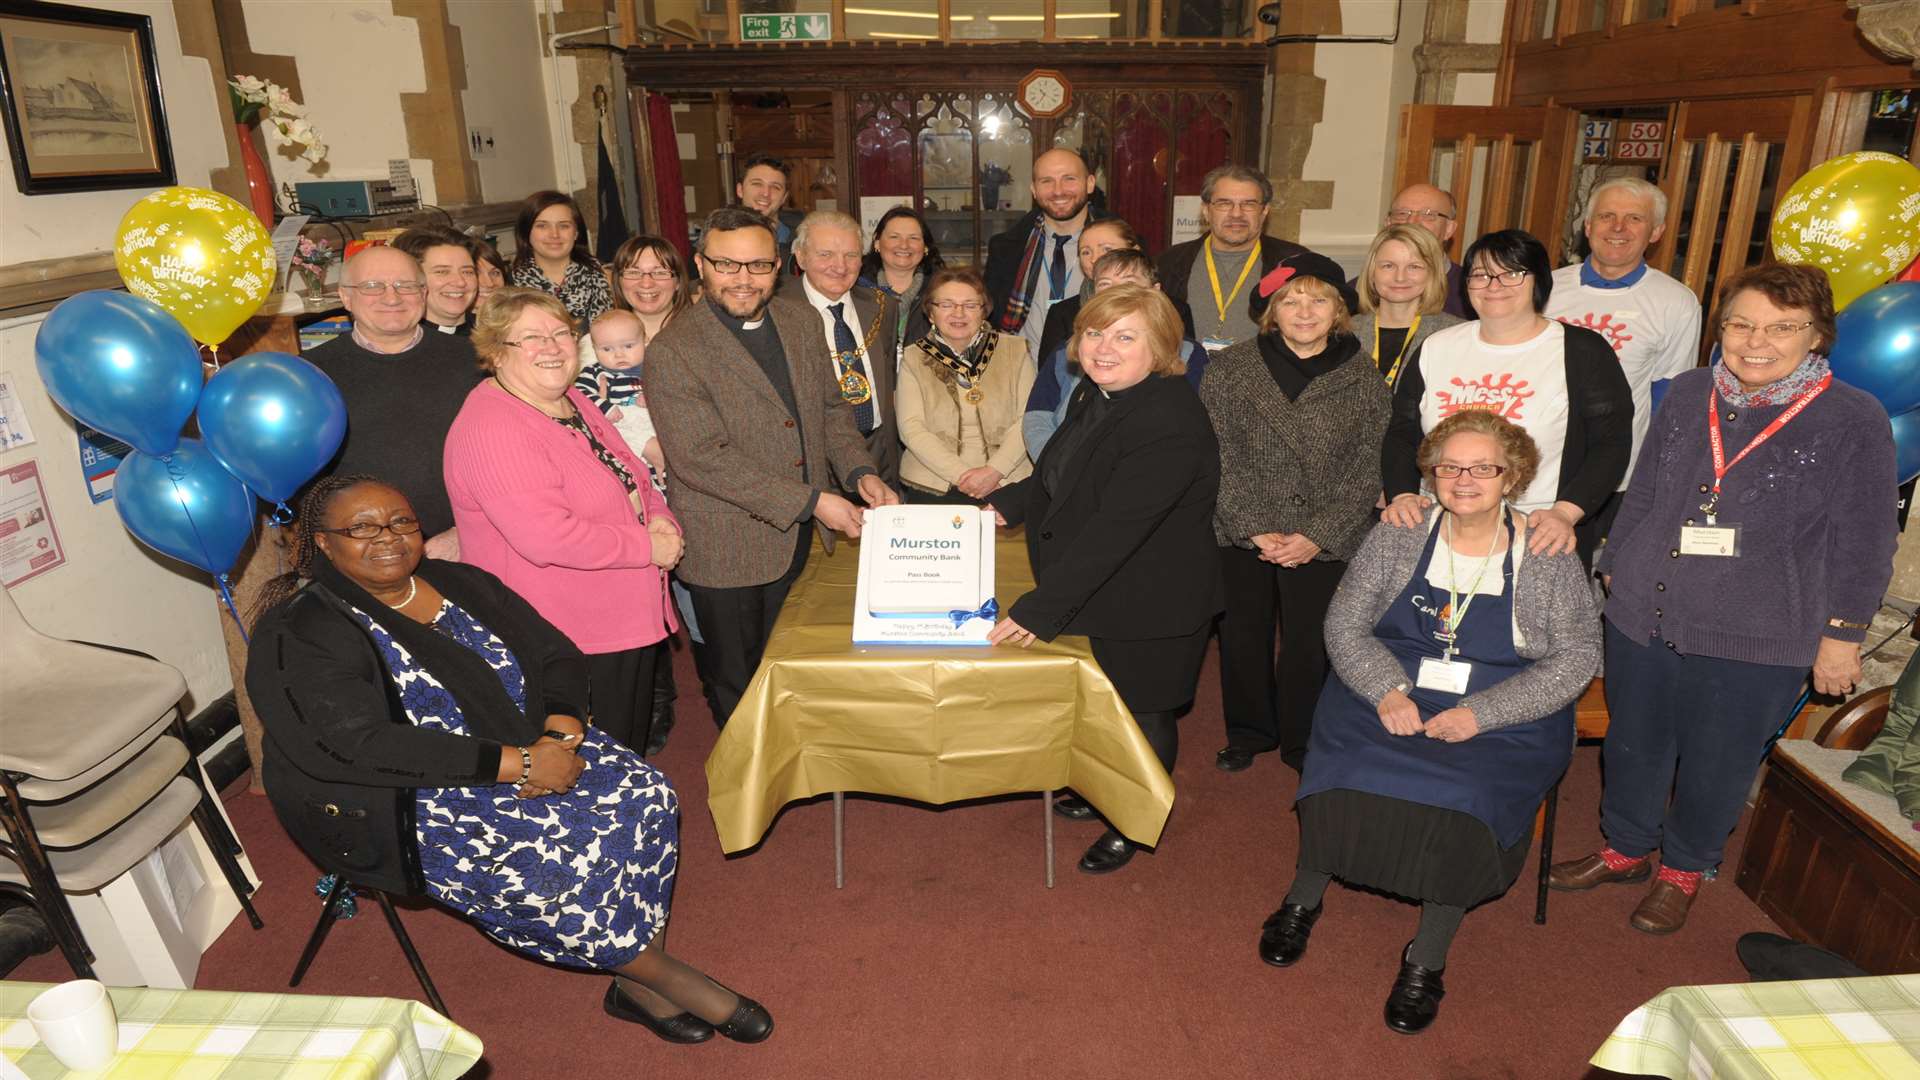 A celebration marking the first Community Bank at All saints Church in Murston